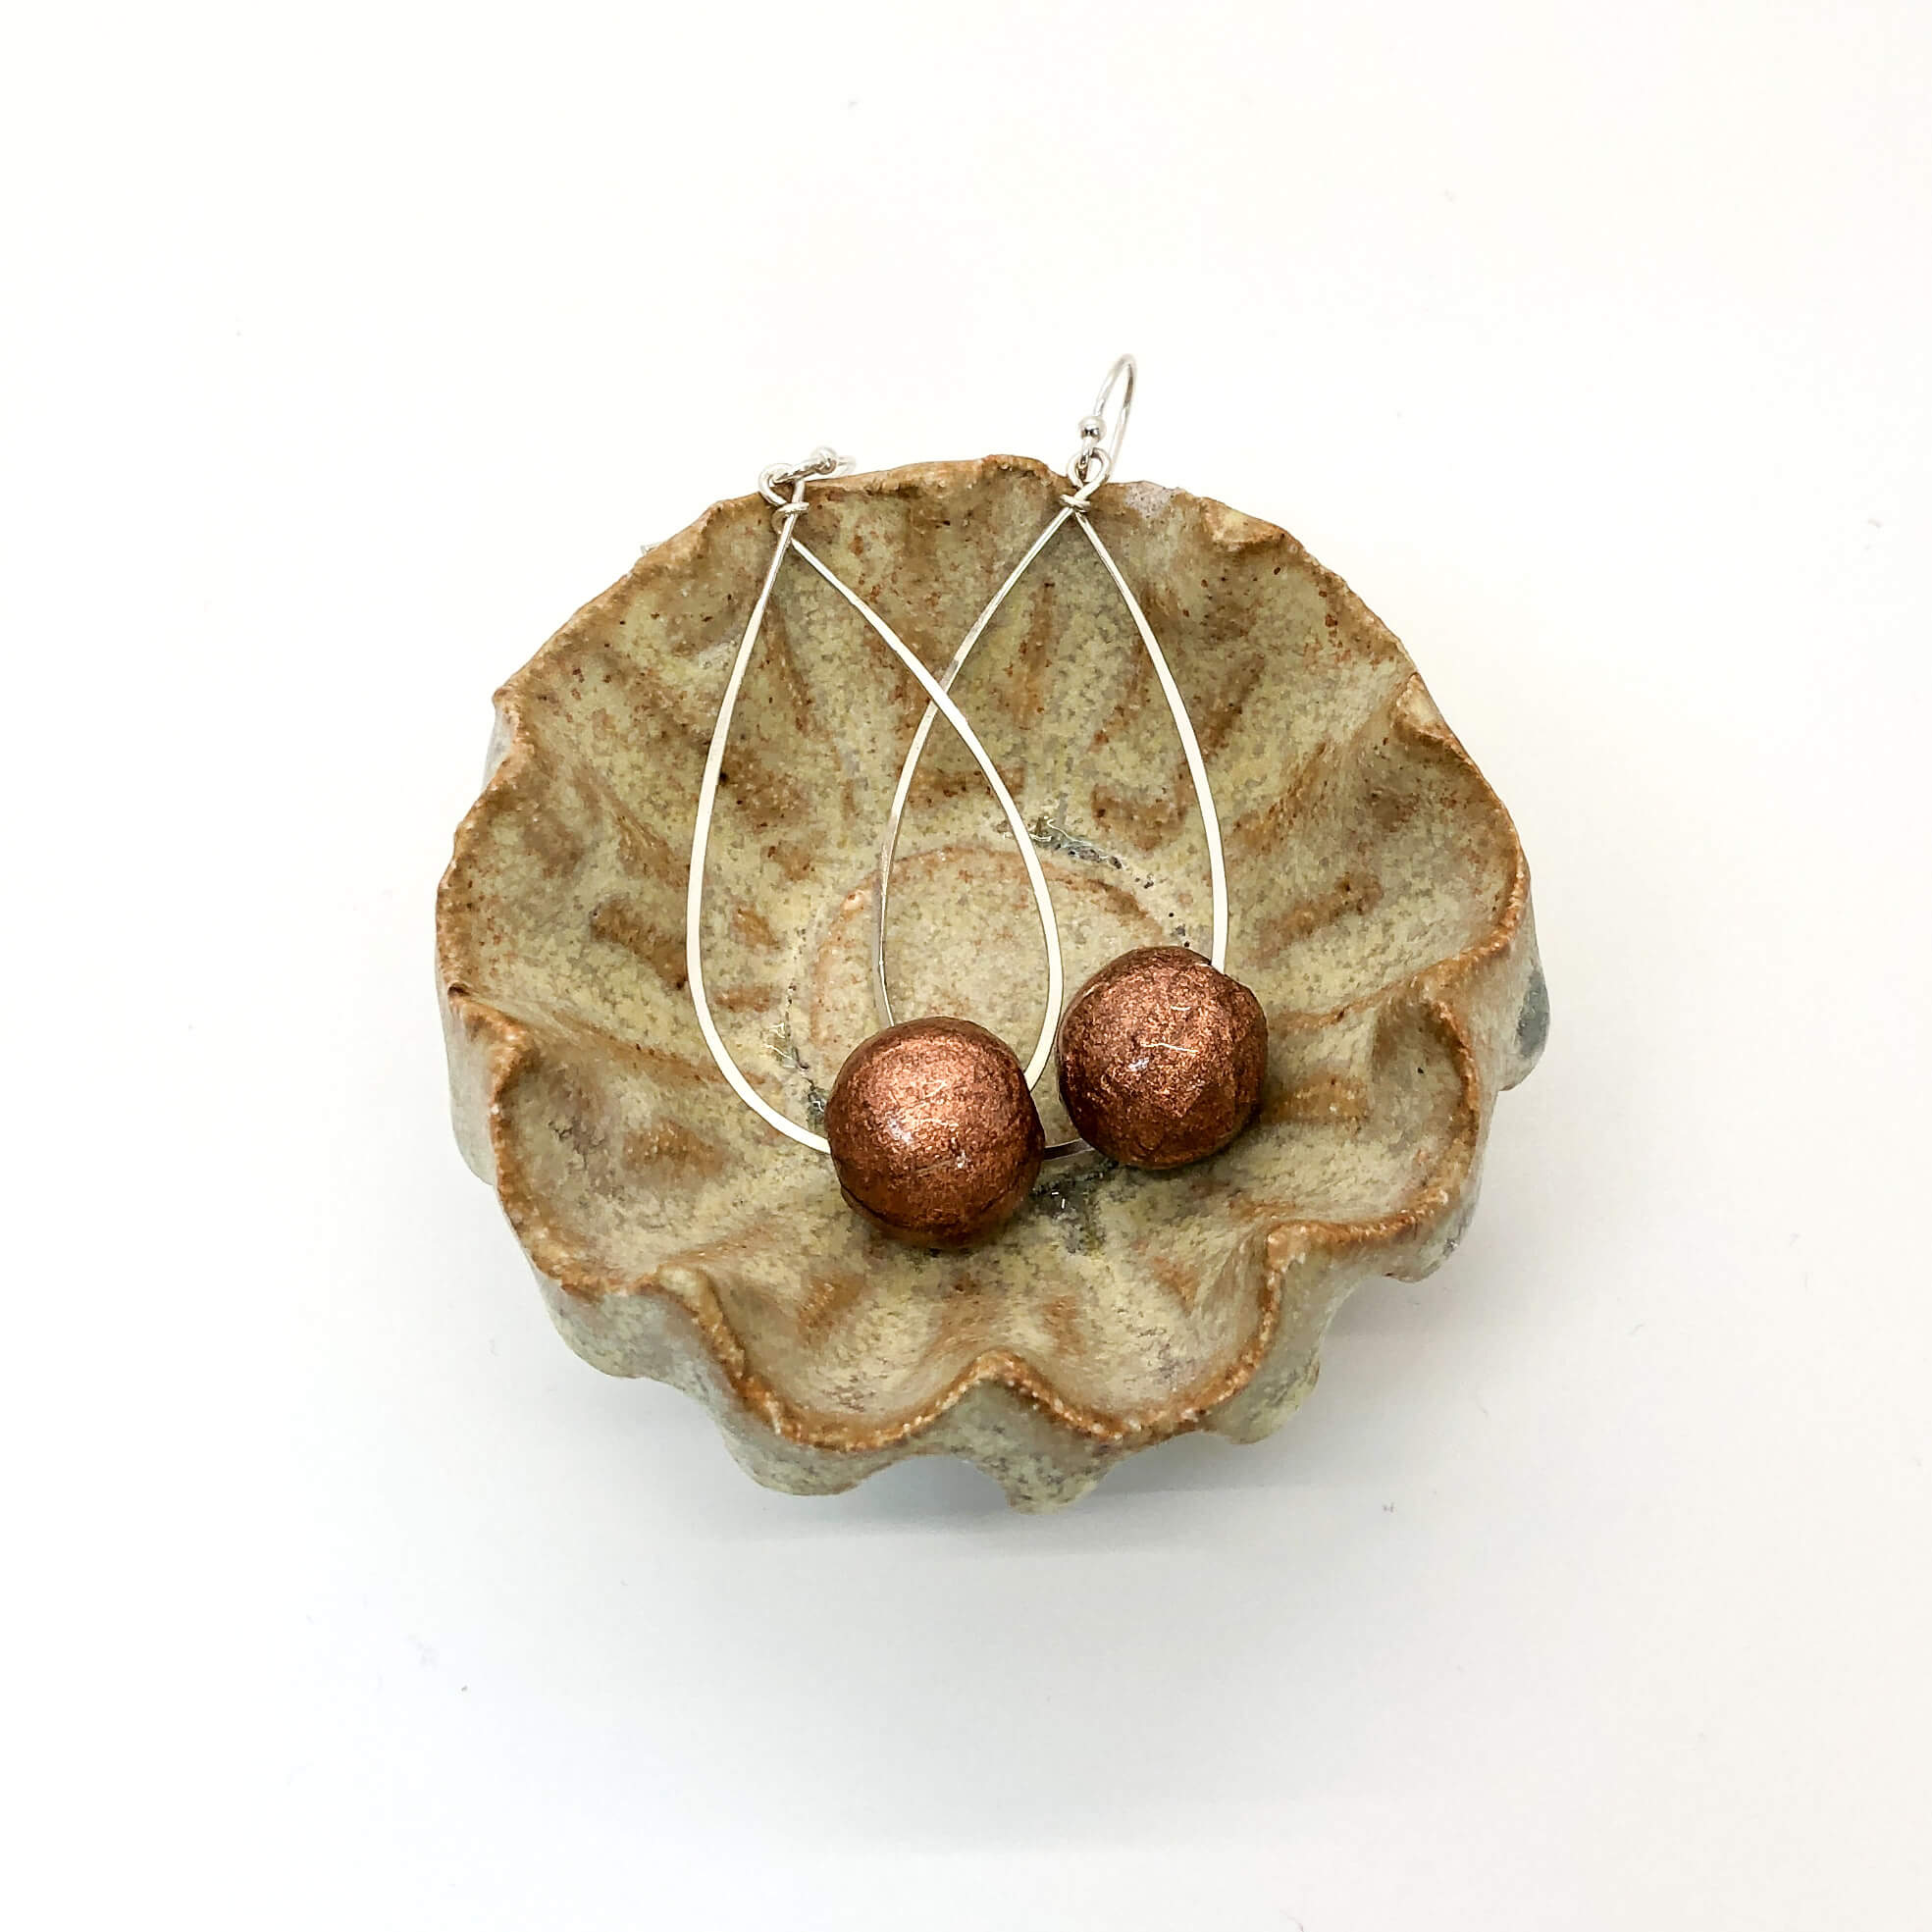 Sterling silver hammered teardrop dangle hoops with sparkly rose gold paper beads shown in ceramic dish